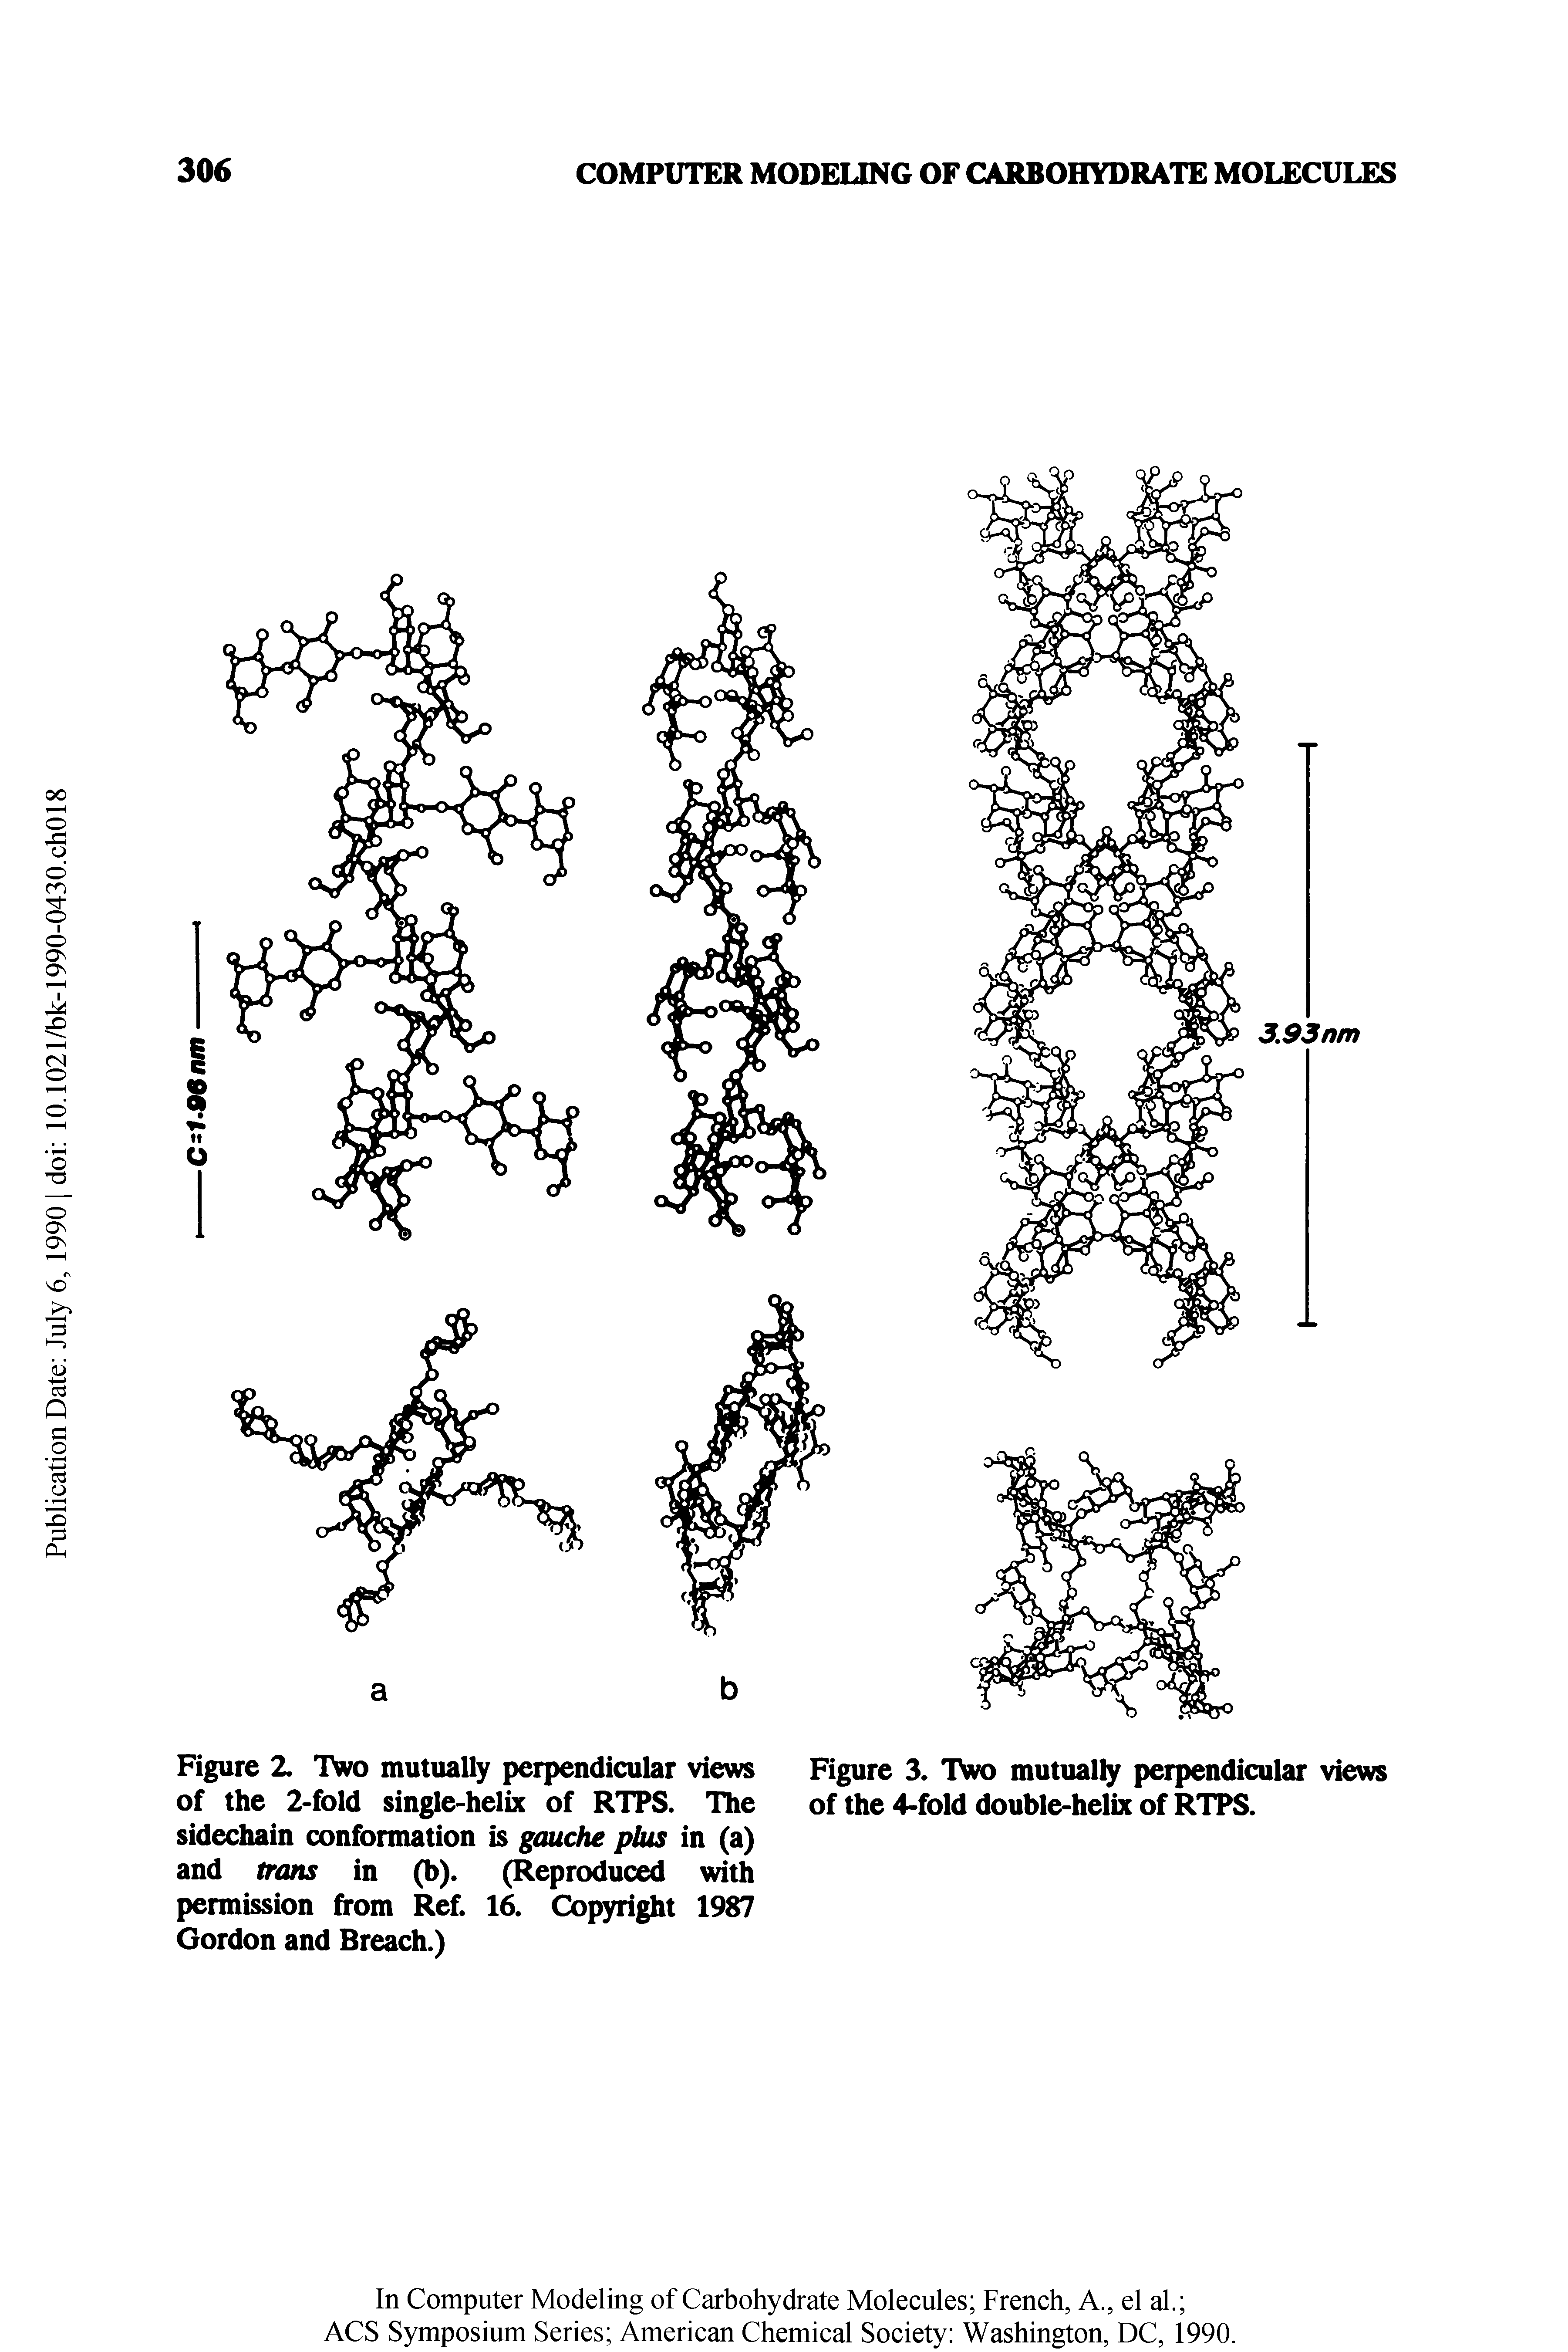 Figure 2. Two mutually perpendicular views of the 2-fold single-helix of RTFS. The sidechain conformation is gauche plus in (a) and irons in (b). (Reproduced with permission from Ref. 16. Copyright 1987 Gordon and Breach.)...